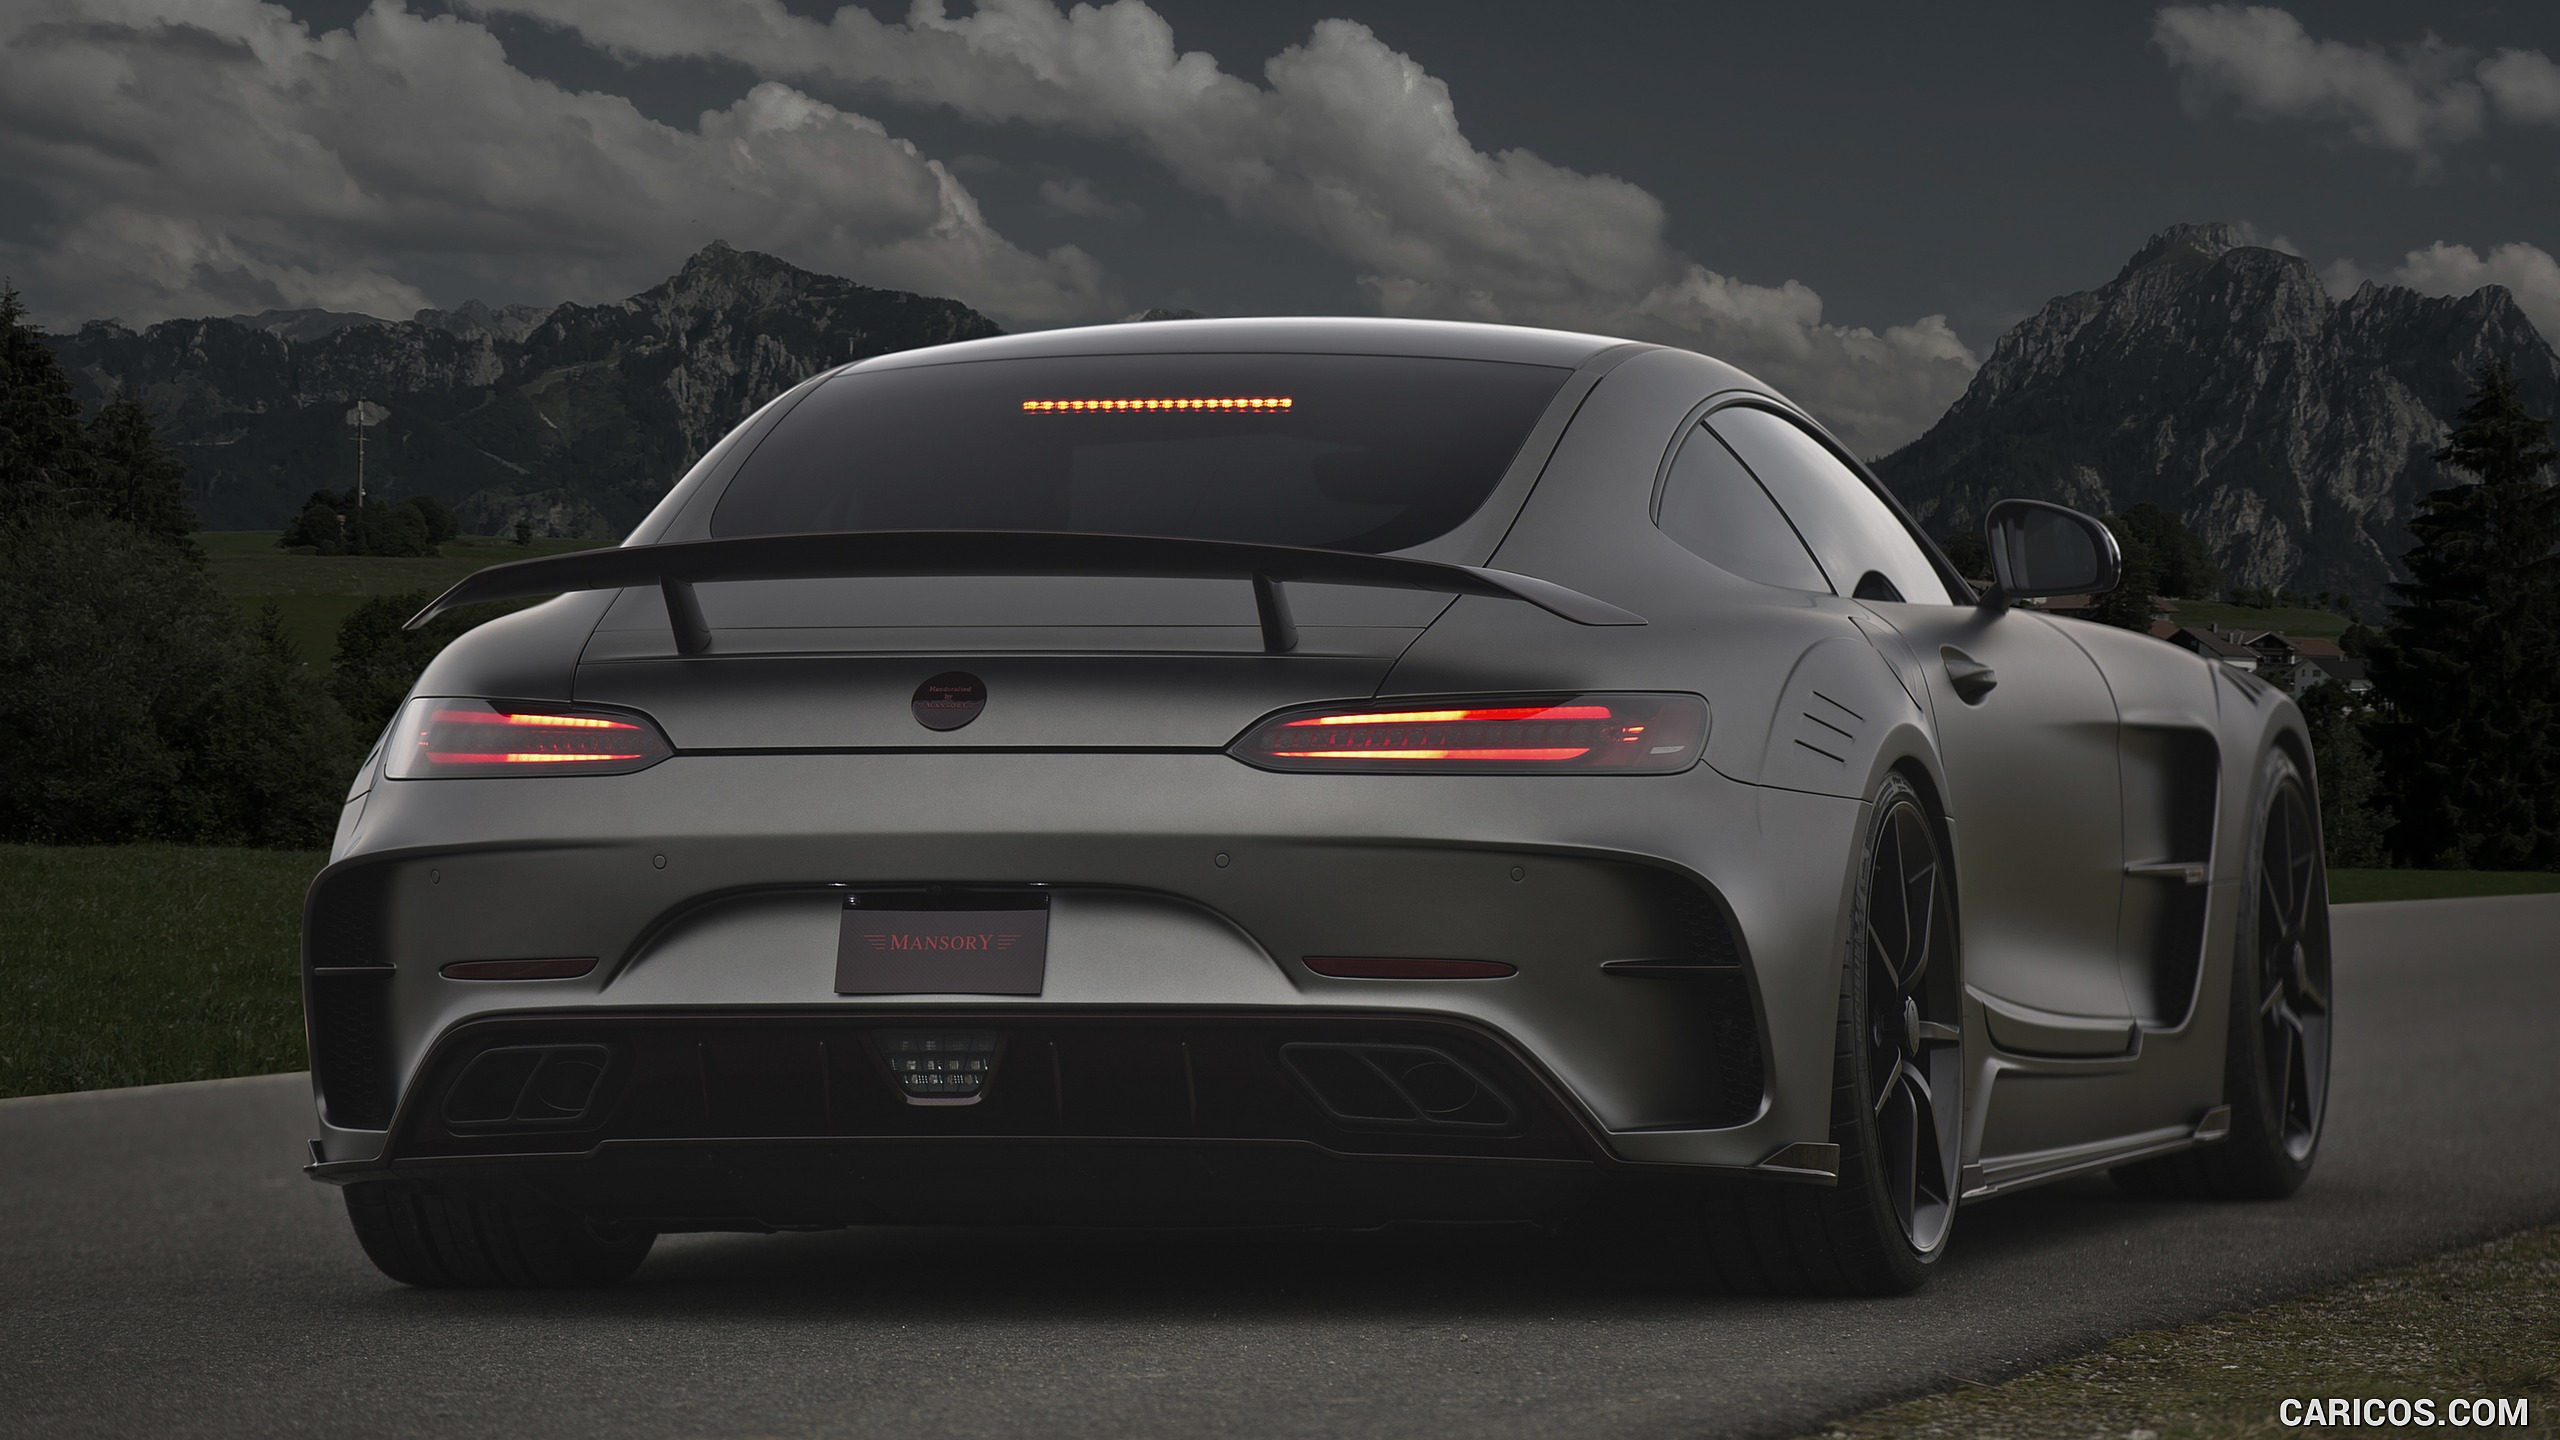 2016 MANSORY Mercedes-AMG GT S - Rear, #5 of 10